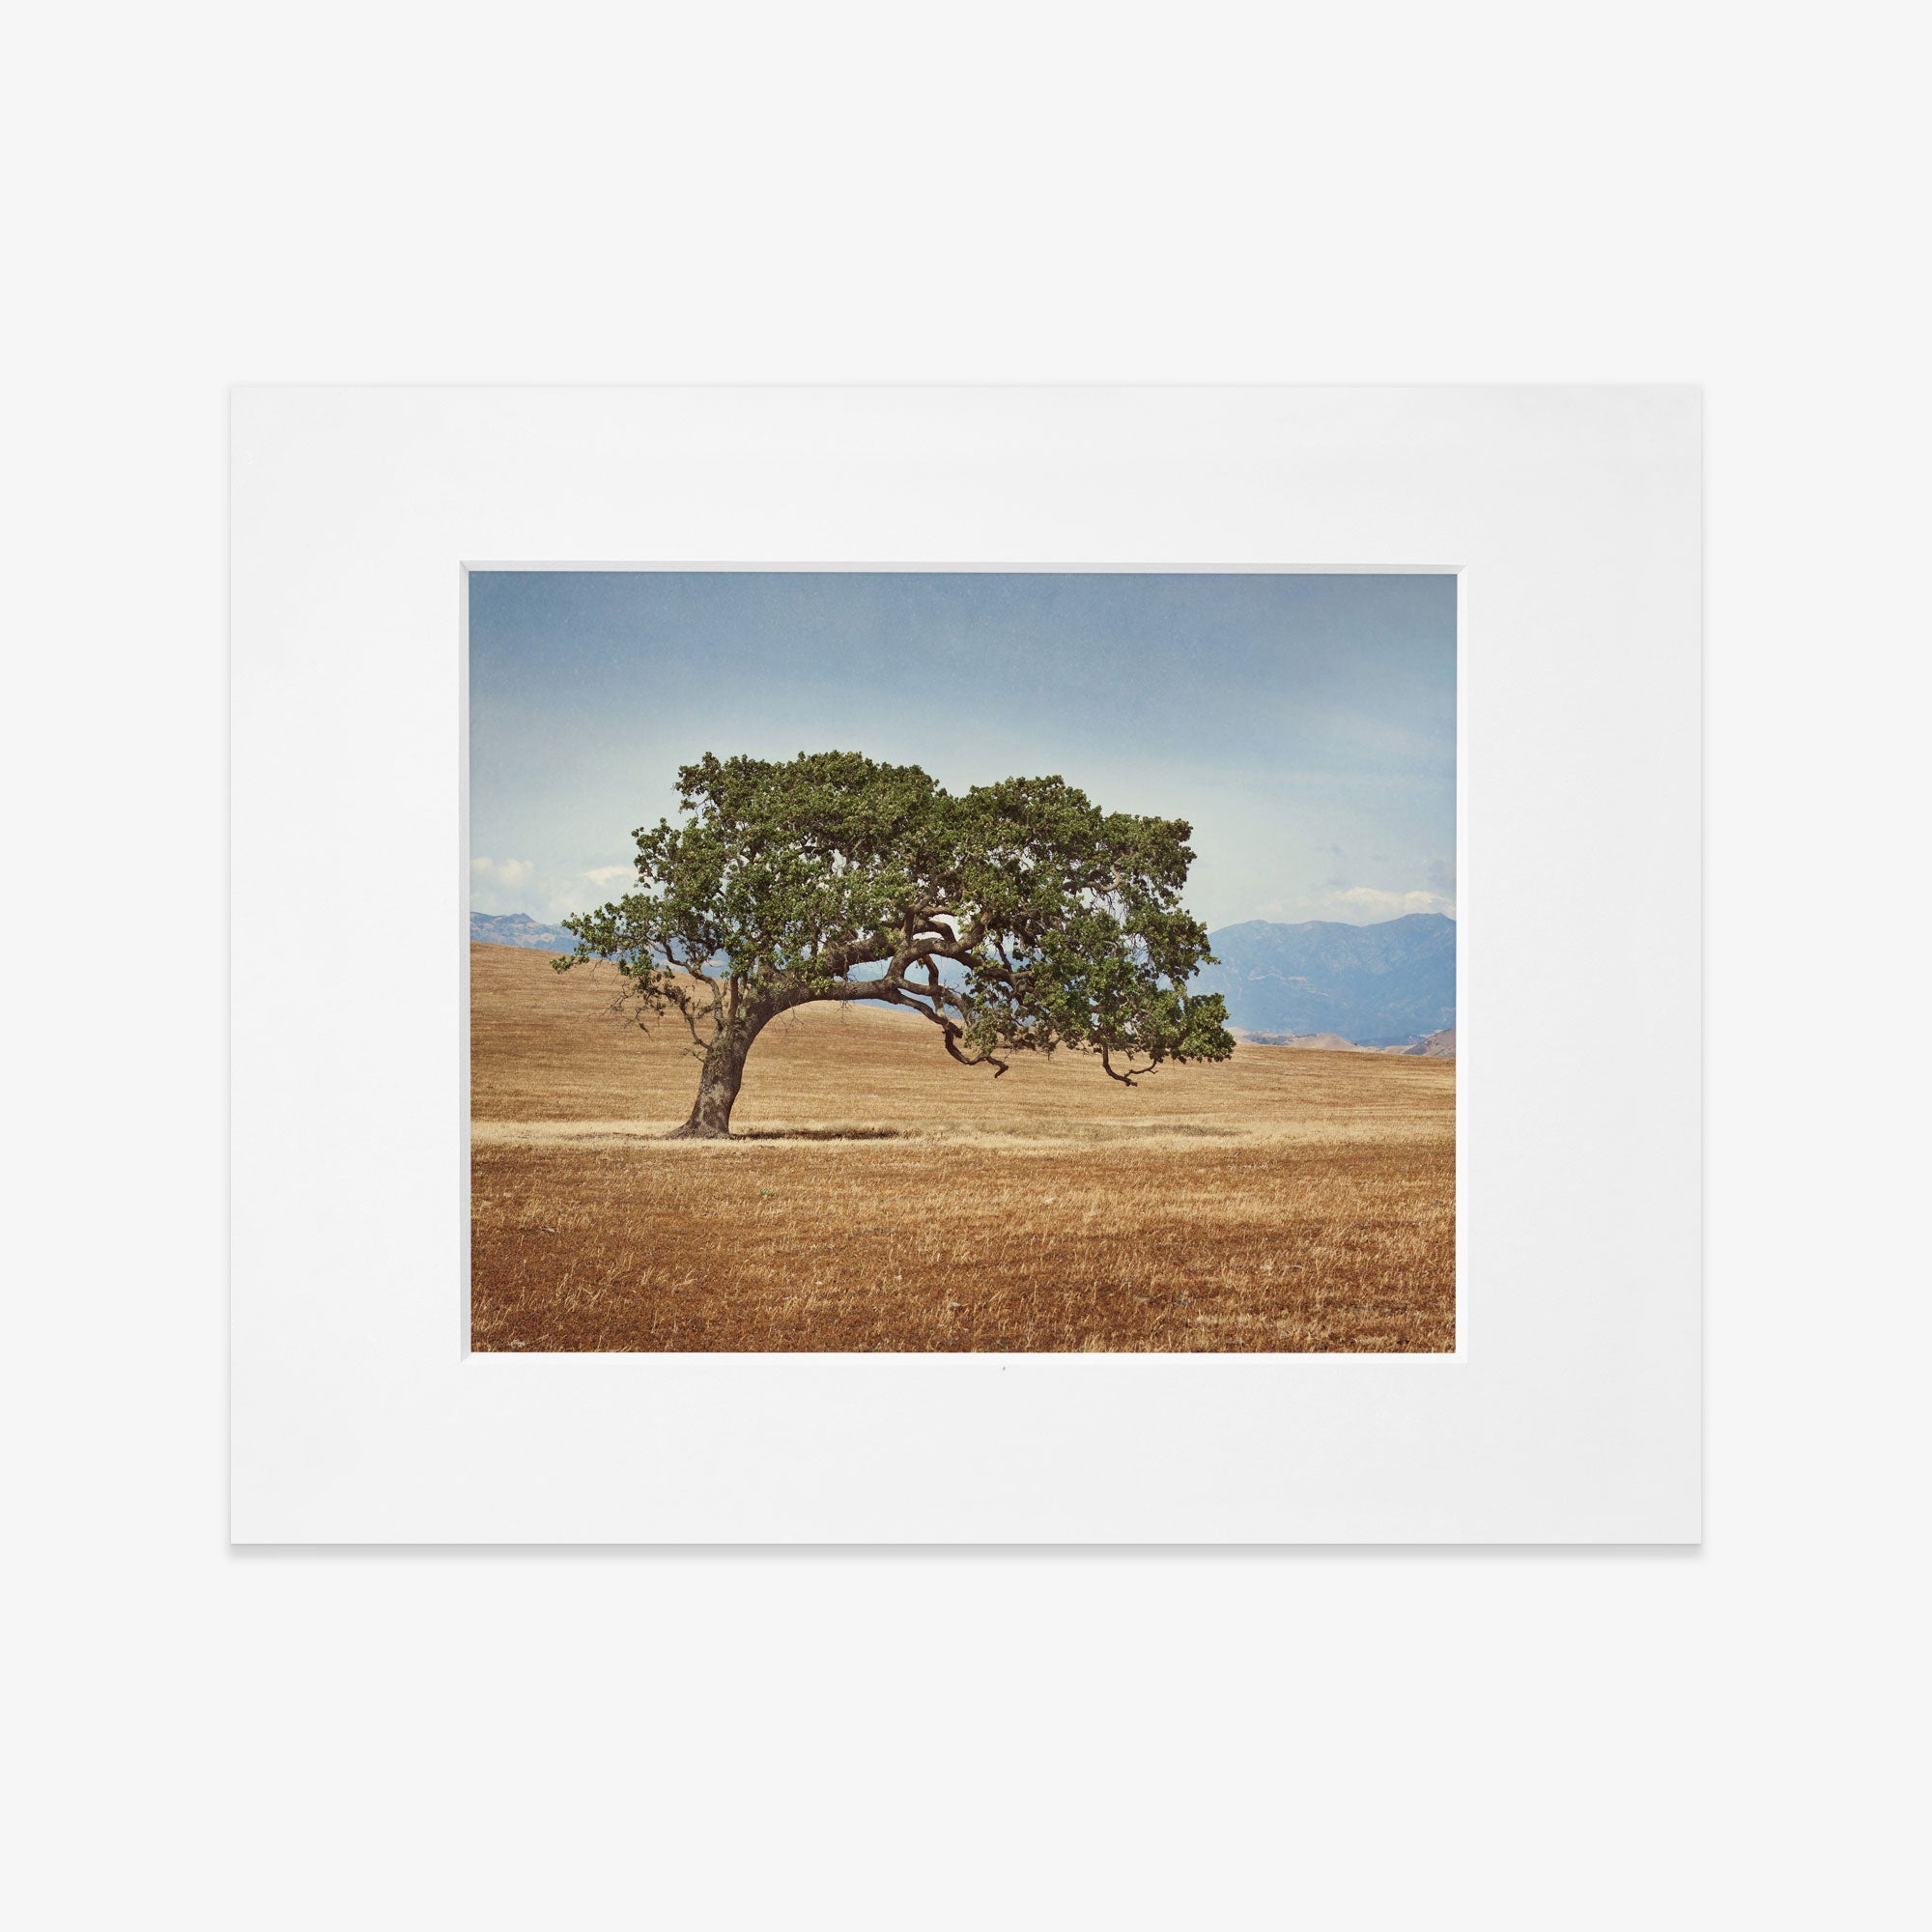 A framed photo of a solitary California Oak tree with a twisting trunk and sprawling branches in a dry grassy field, with mountains and a clear sky in the background - Offley Green&#39;s California Oak Tree Print, &#39;Windswept&#39;.